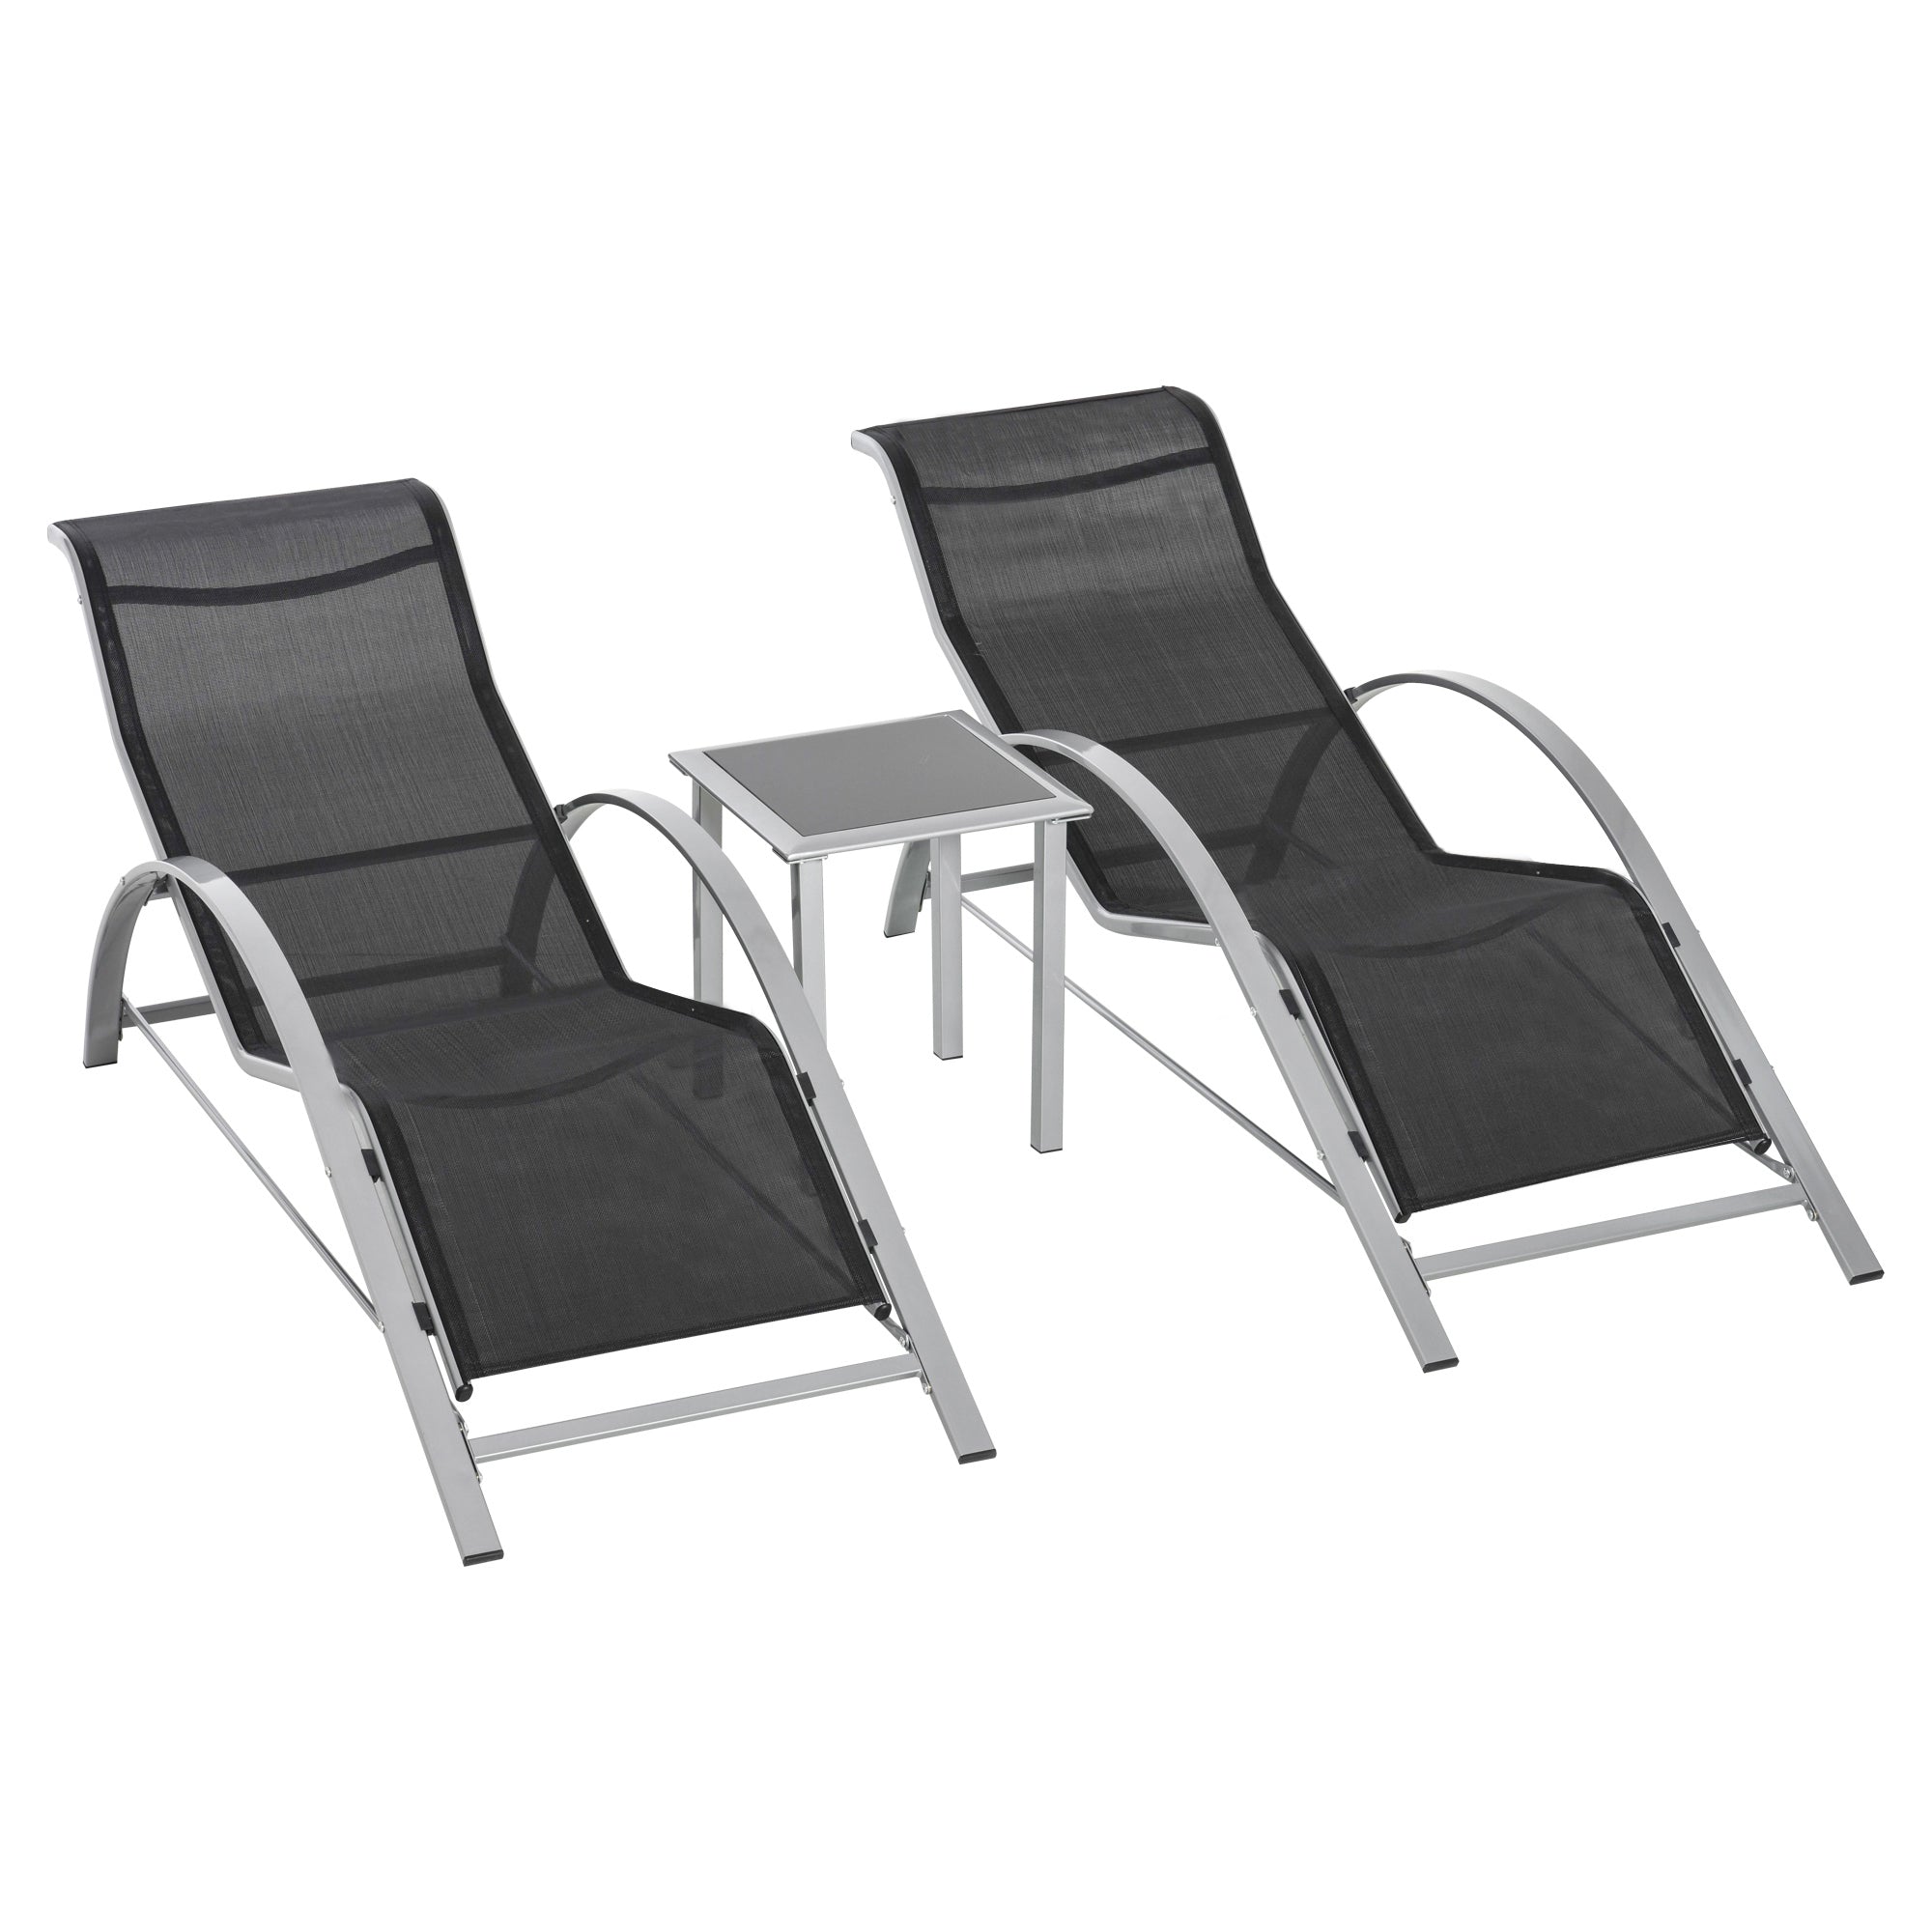 Outsunny 3 Pieces Lounge Chair Set Garden Sunbathing Chair w/ Table Black  | TJ Hughes